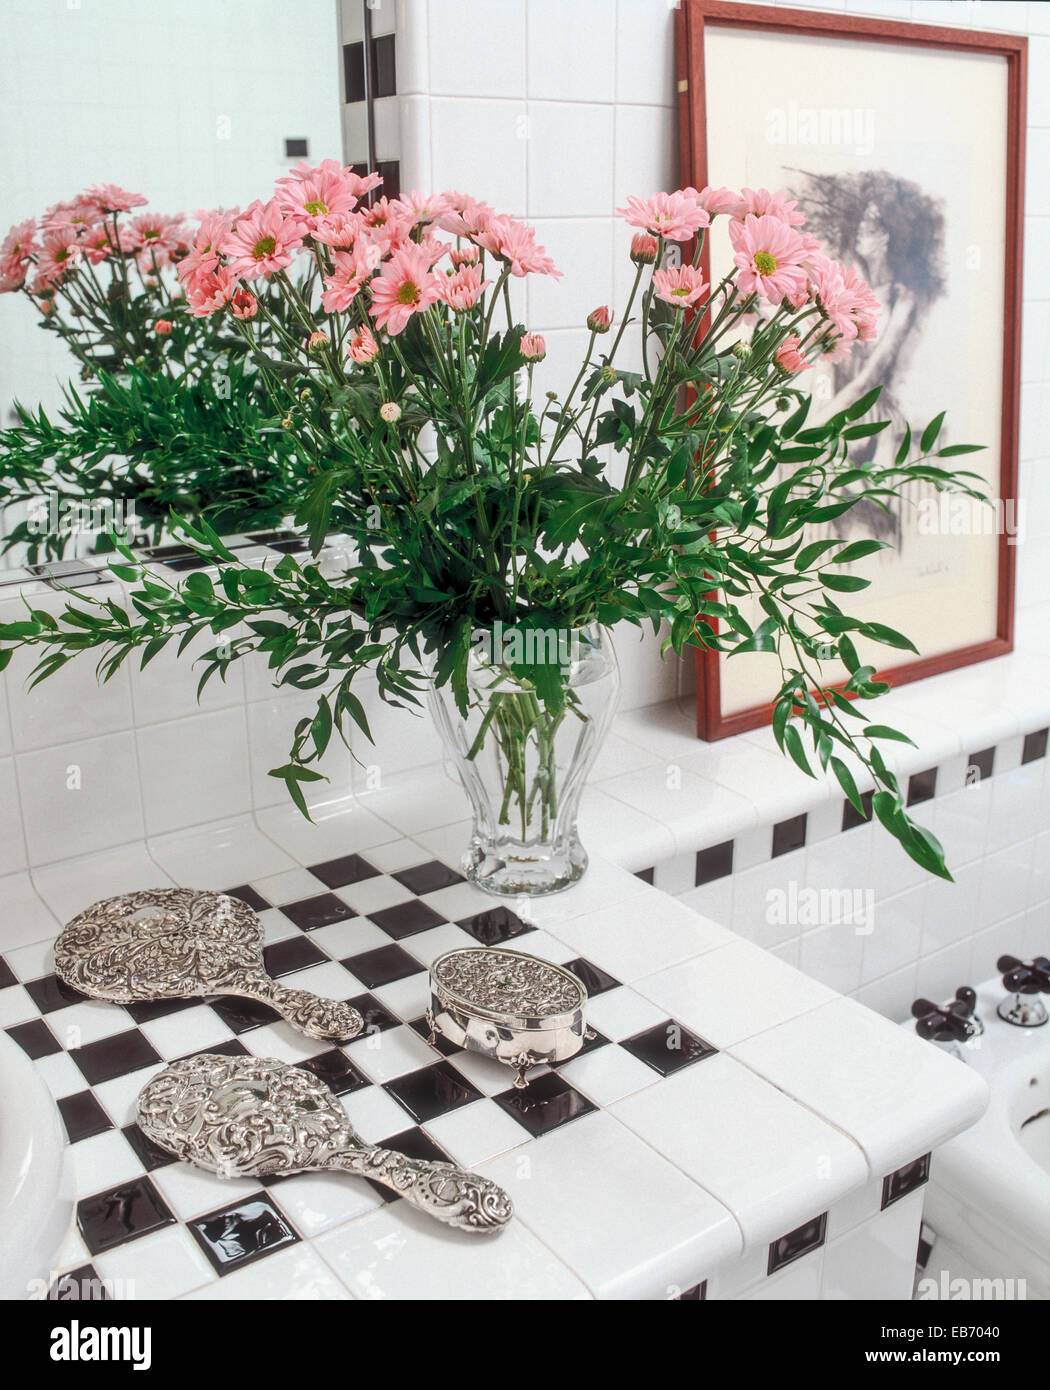 silver objects near to vase of pink flowers on the tile worktop in the bathroom Stock Photo